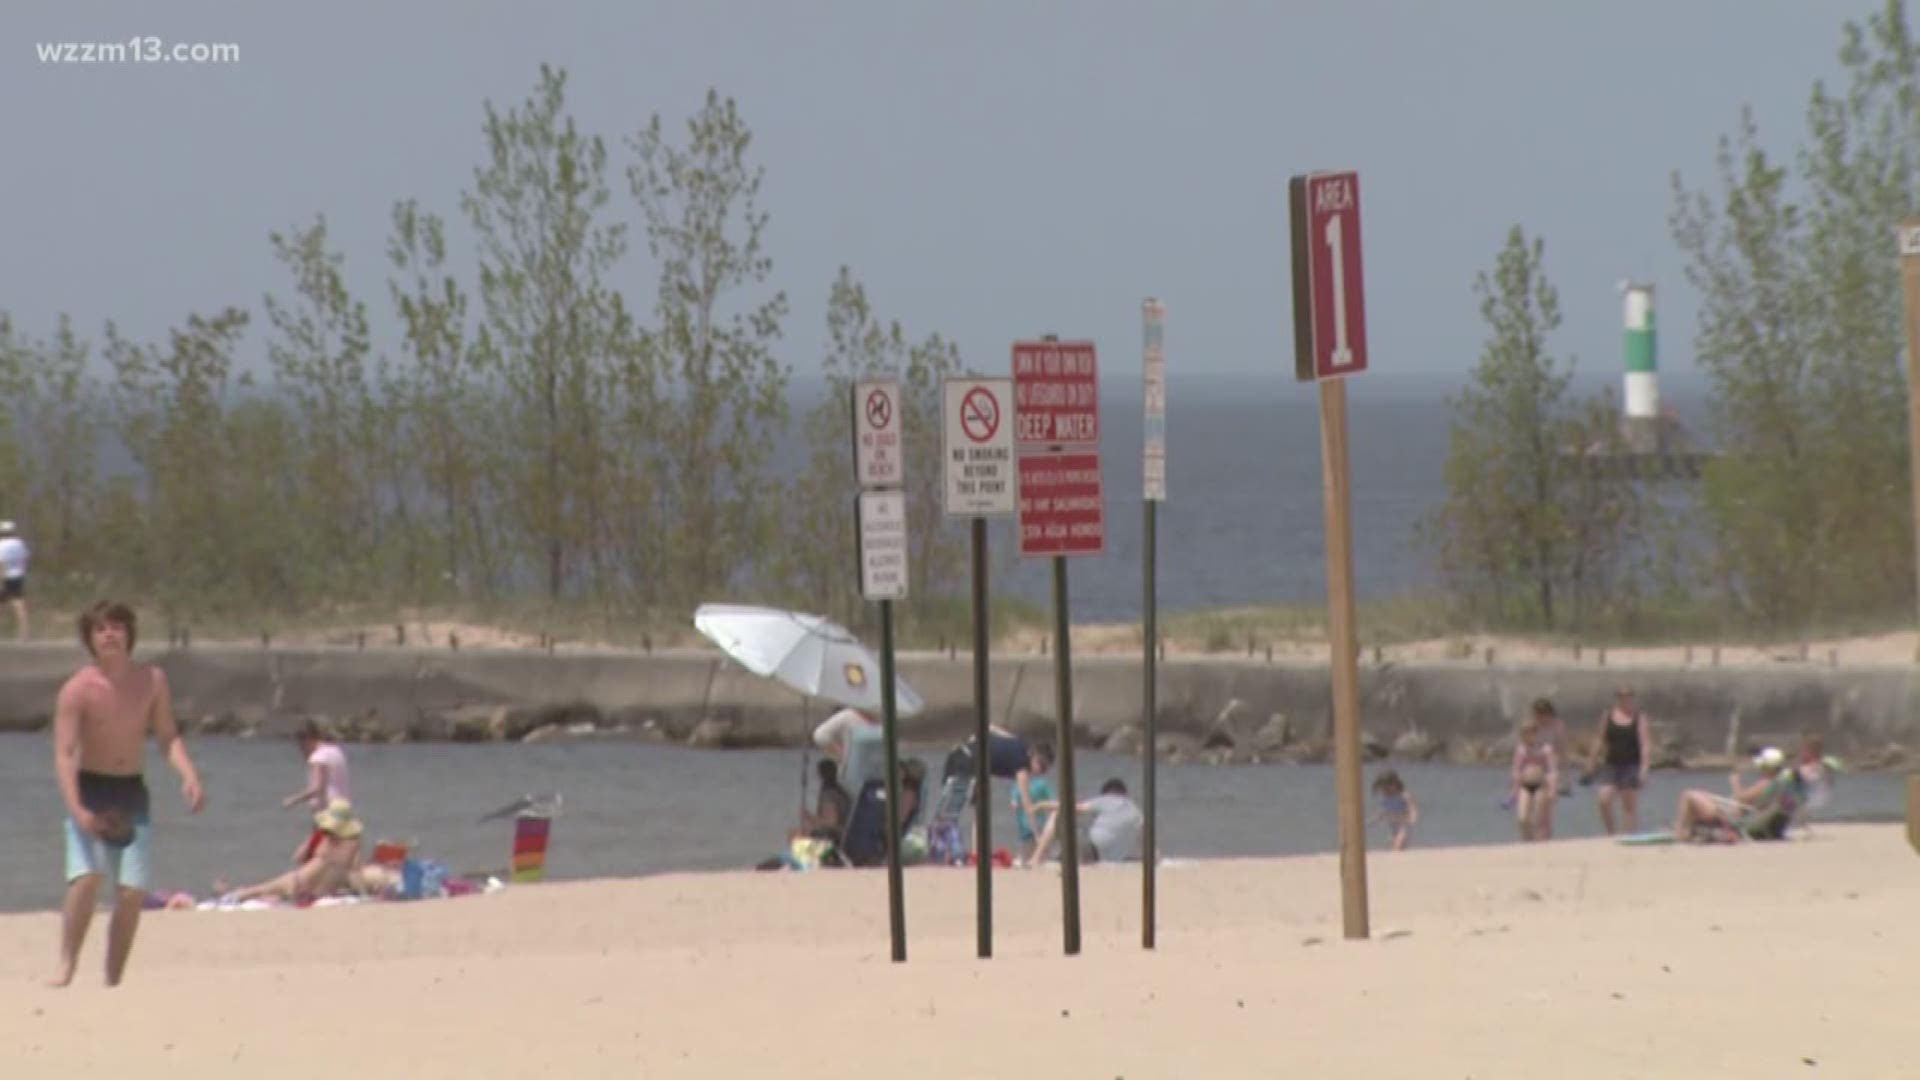 Minus lifeguards, the push to keep swimmers safe